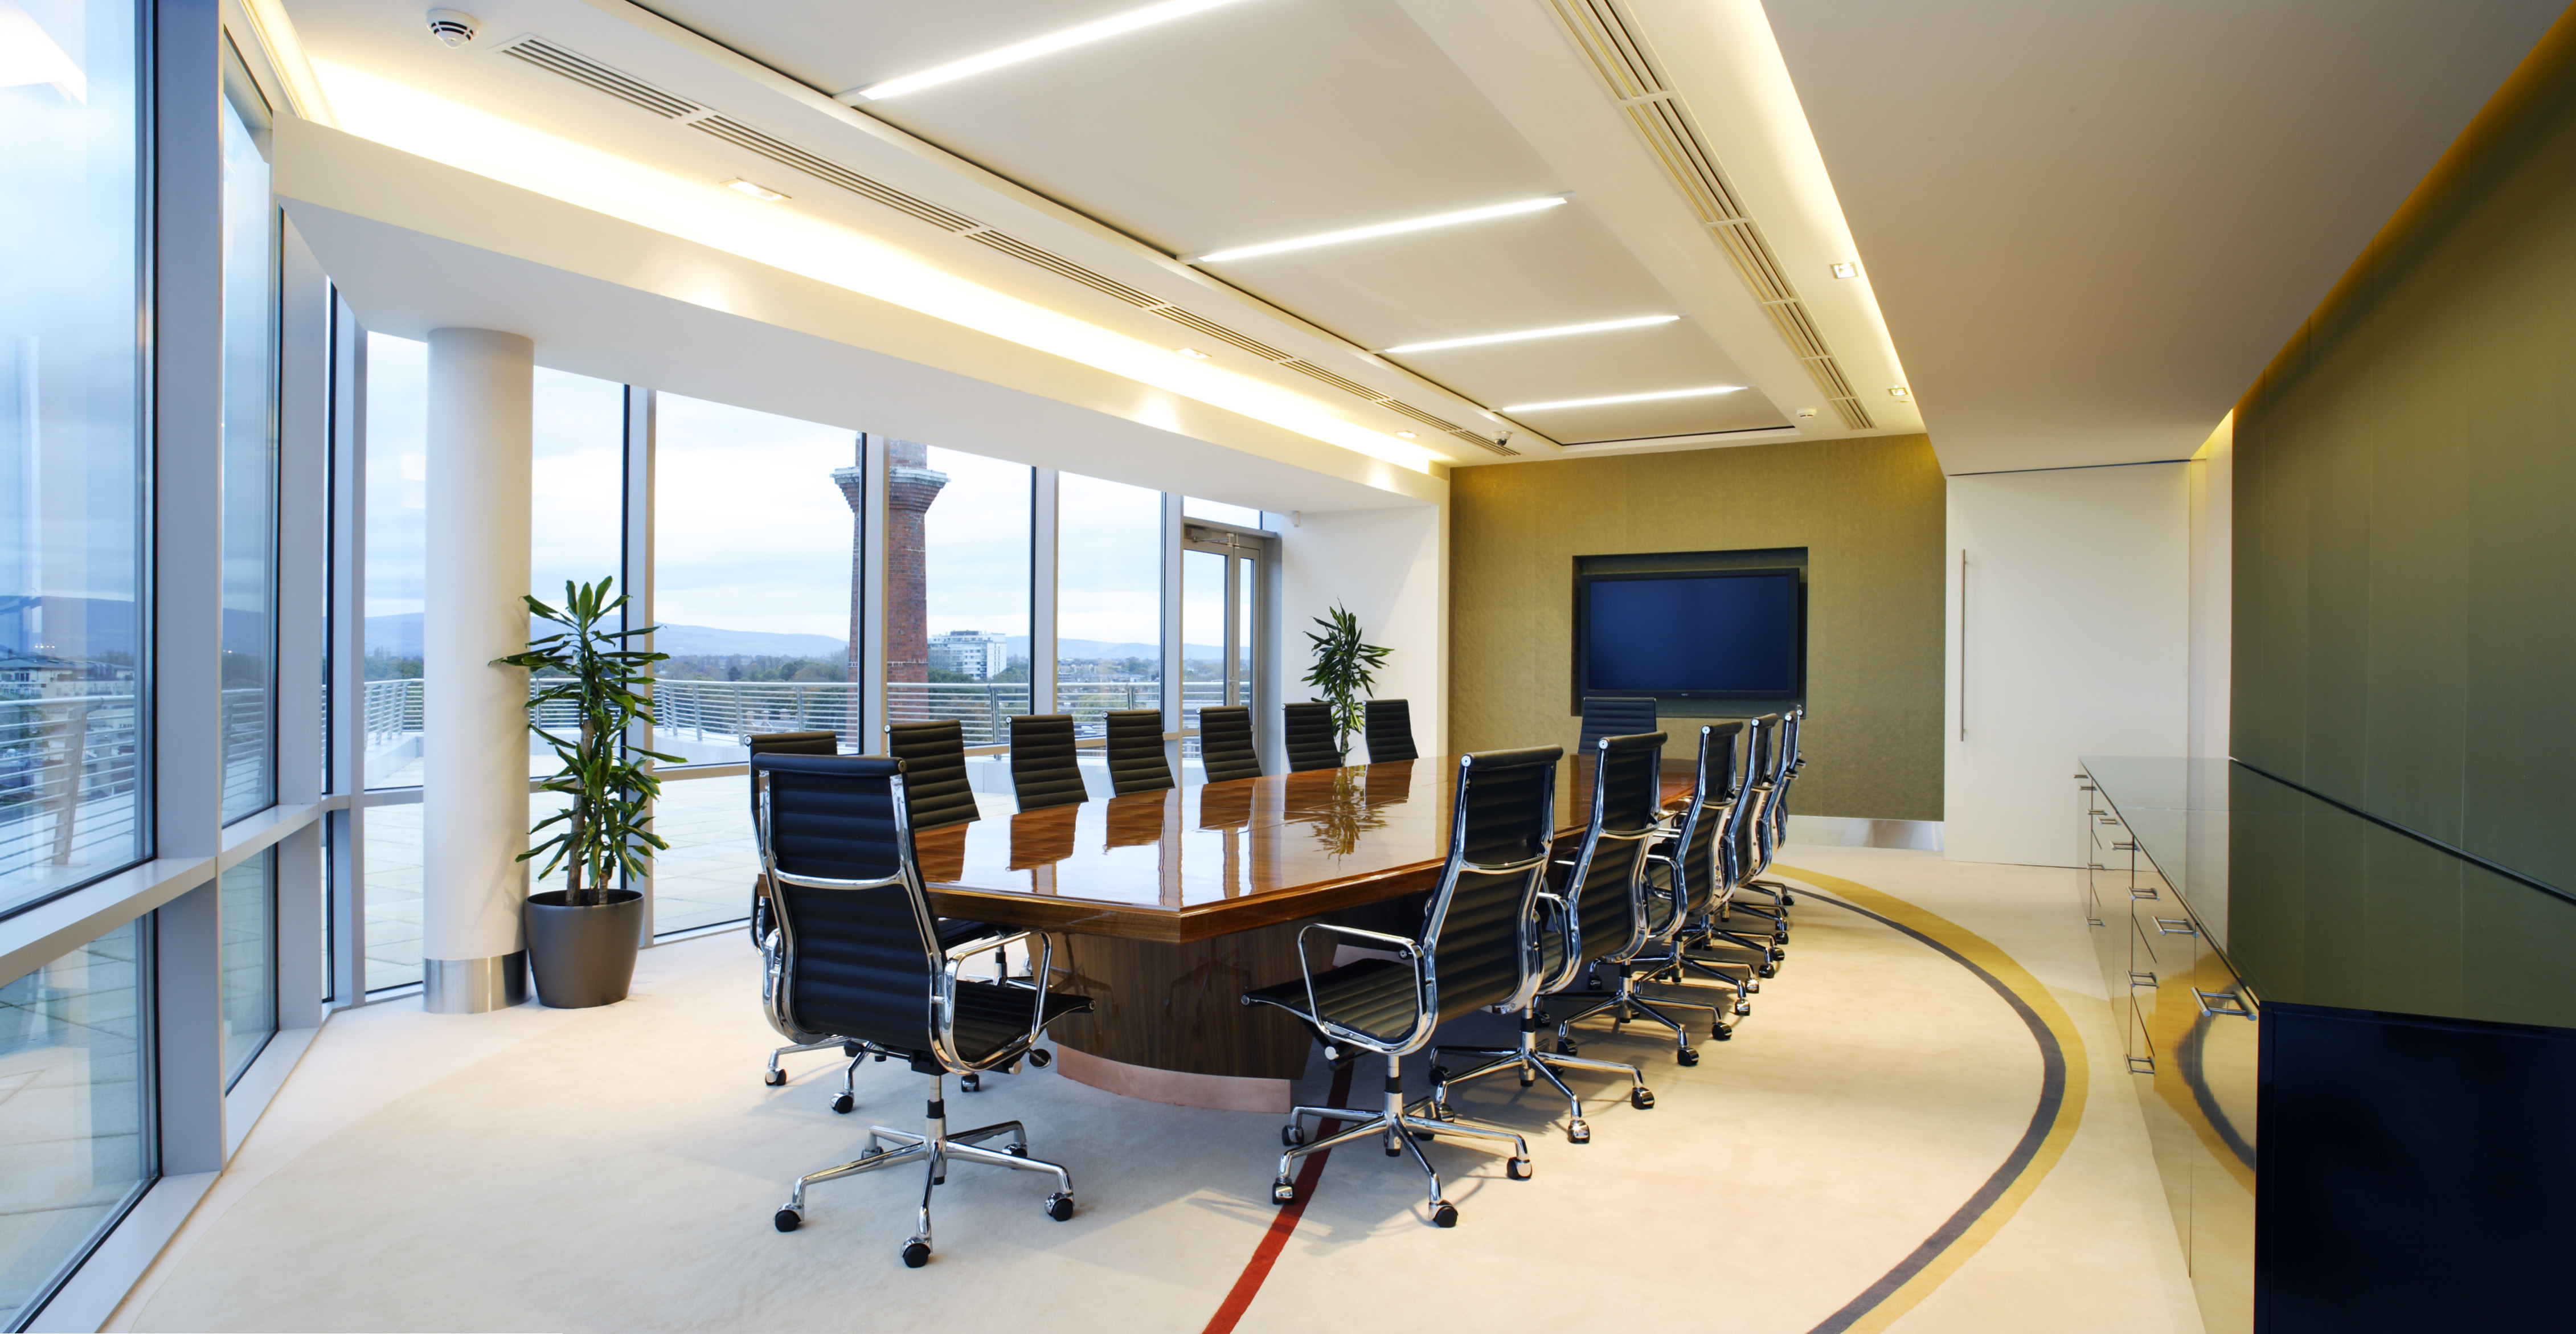 How To Make Business Interiors Reflect Your Company Culture